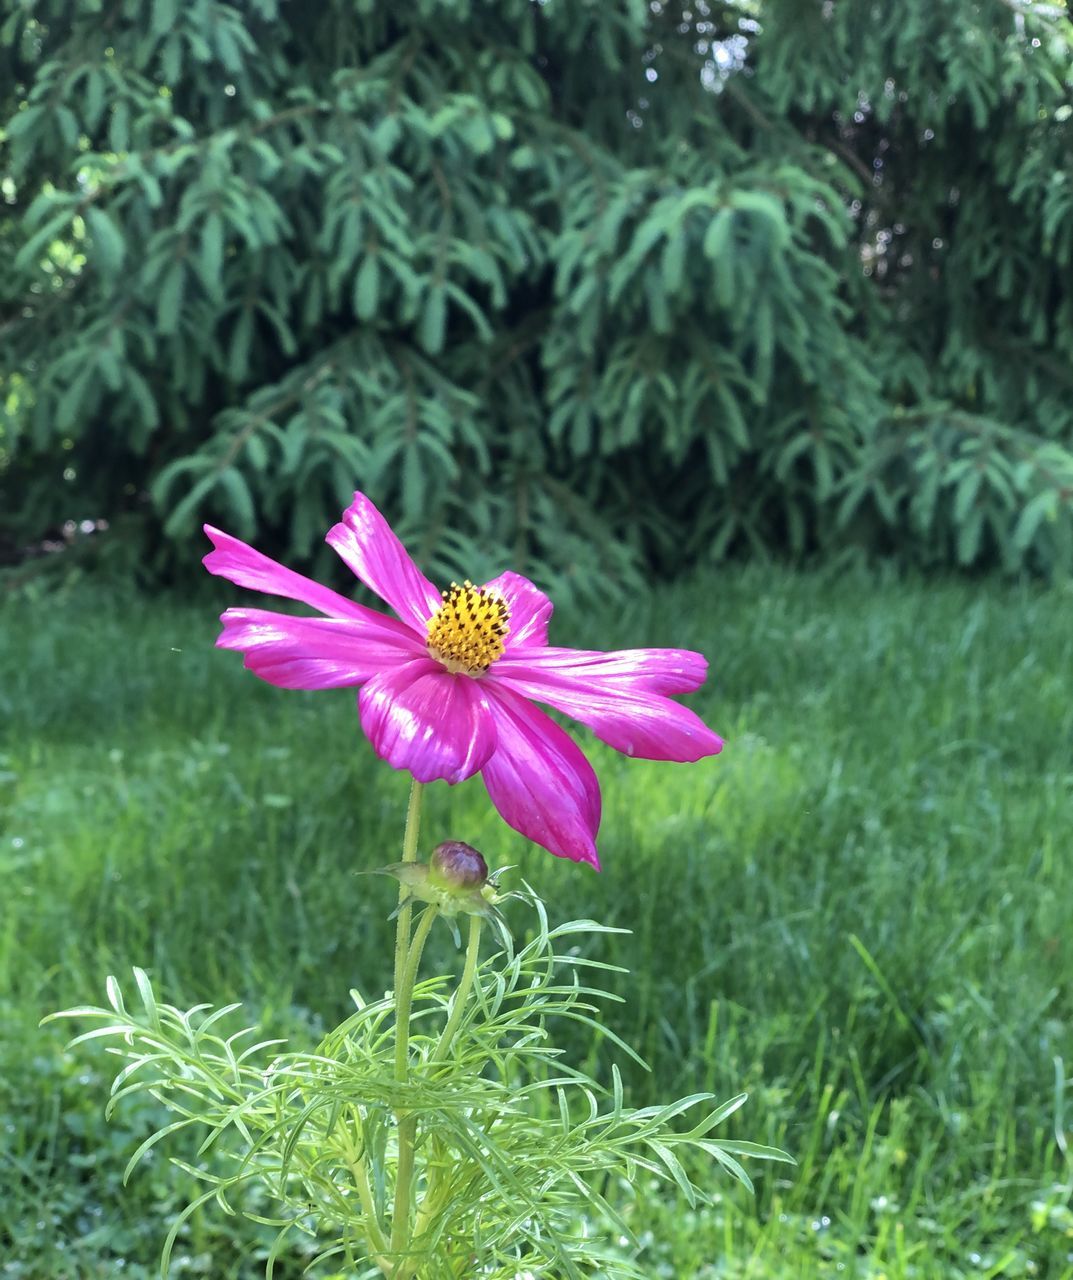 plant, flower, flowering plant, beauty in nature, growth, freshness, fragility, petal, pink, flower head, nature, inflorescence, green, close-up, meadow, day, grass, no people, focus on foreground, pollen, lawn, outdoors, garden cosmos, purple, wildflower, botany, cosmos, garden, field